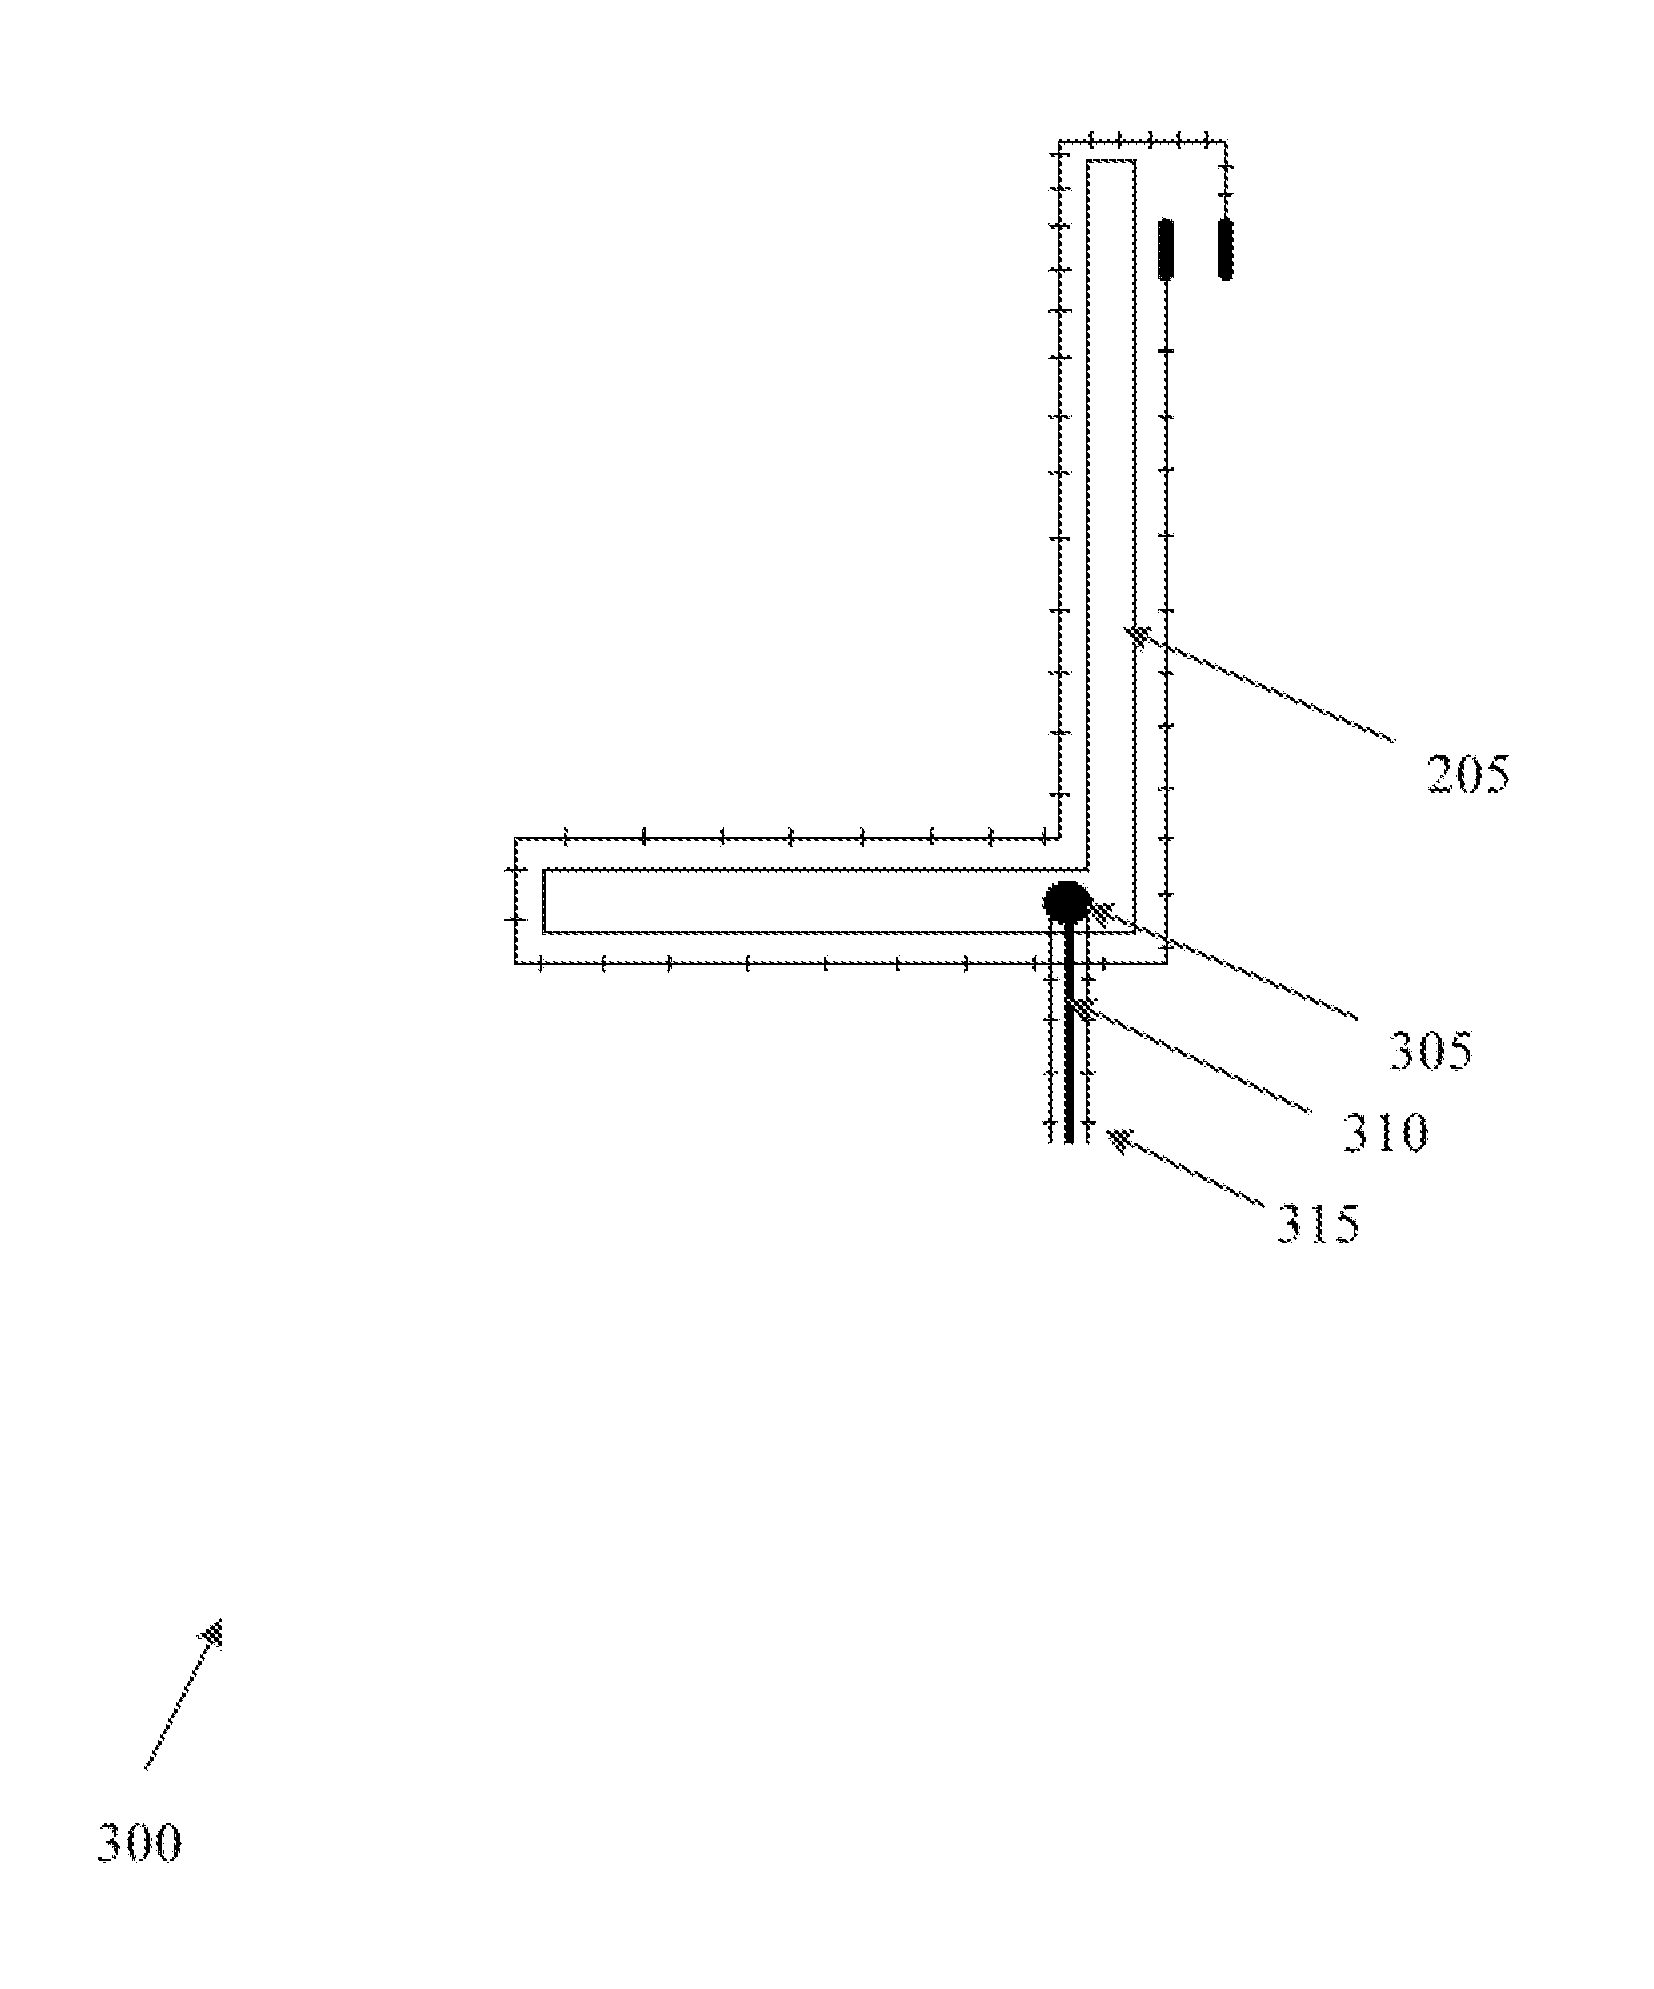 Apparatus for an EMP shield for computing devices